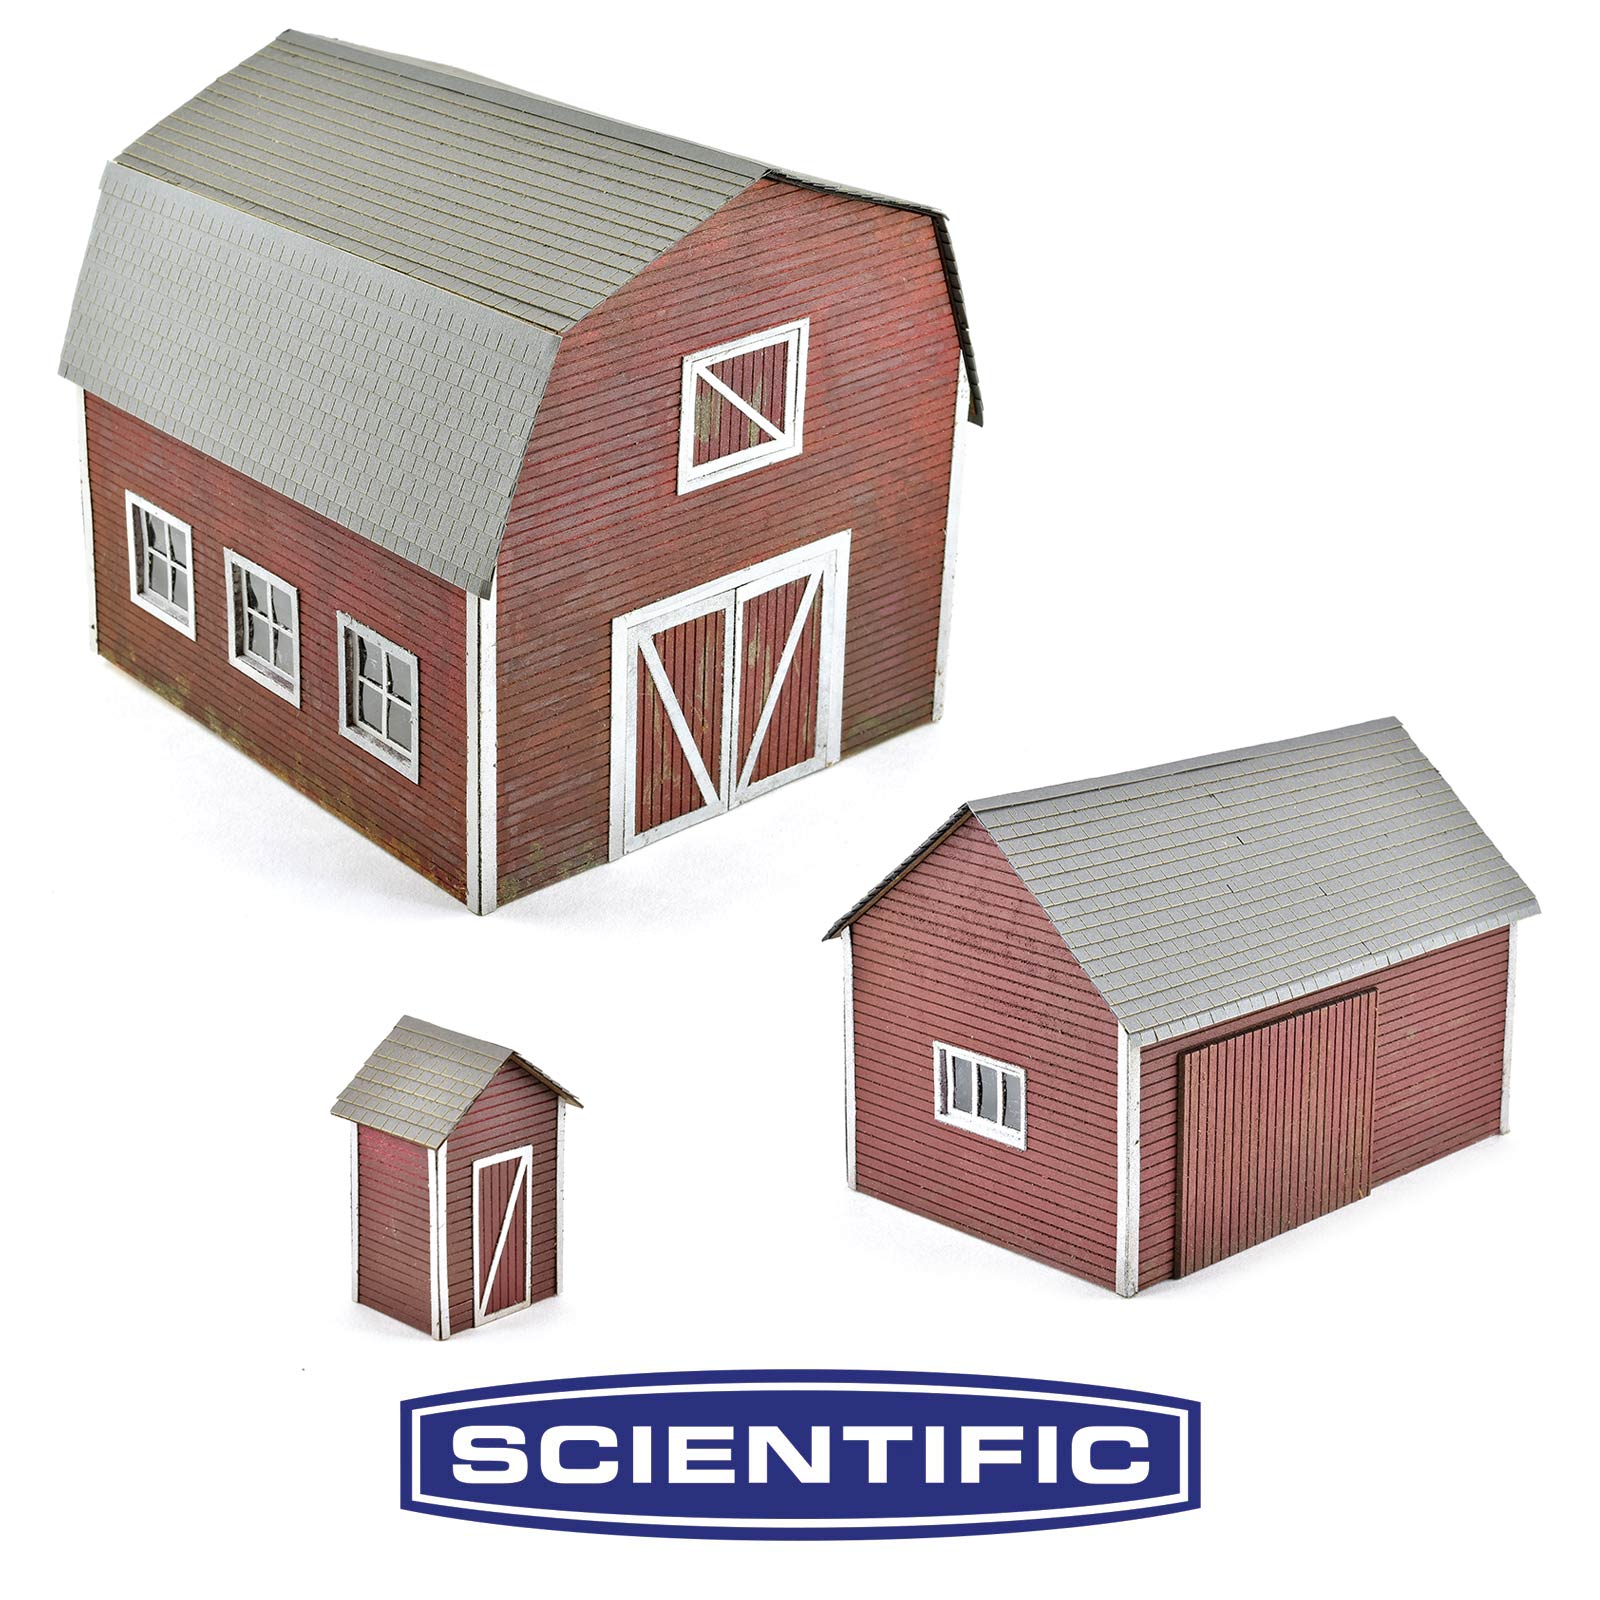 Rural Farm Structures, Deluxe Set of 3 Kits, O Scale, By Scientific